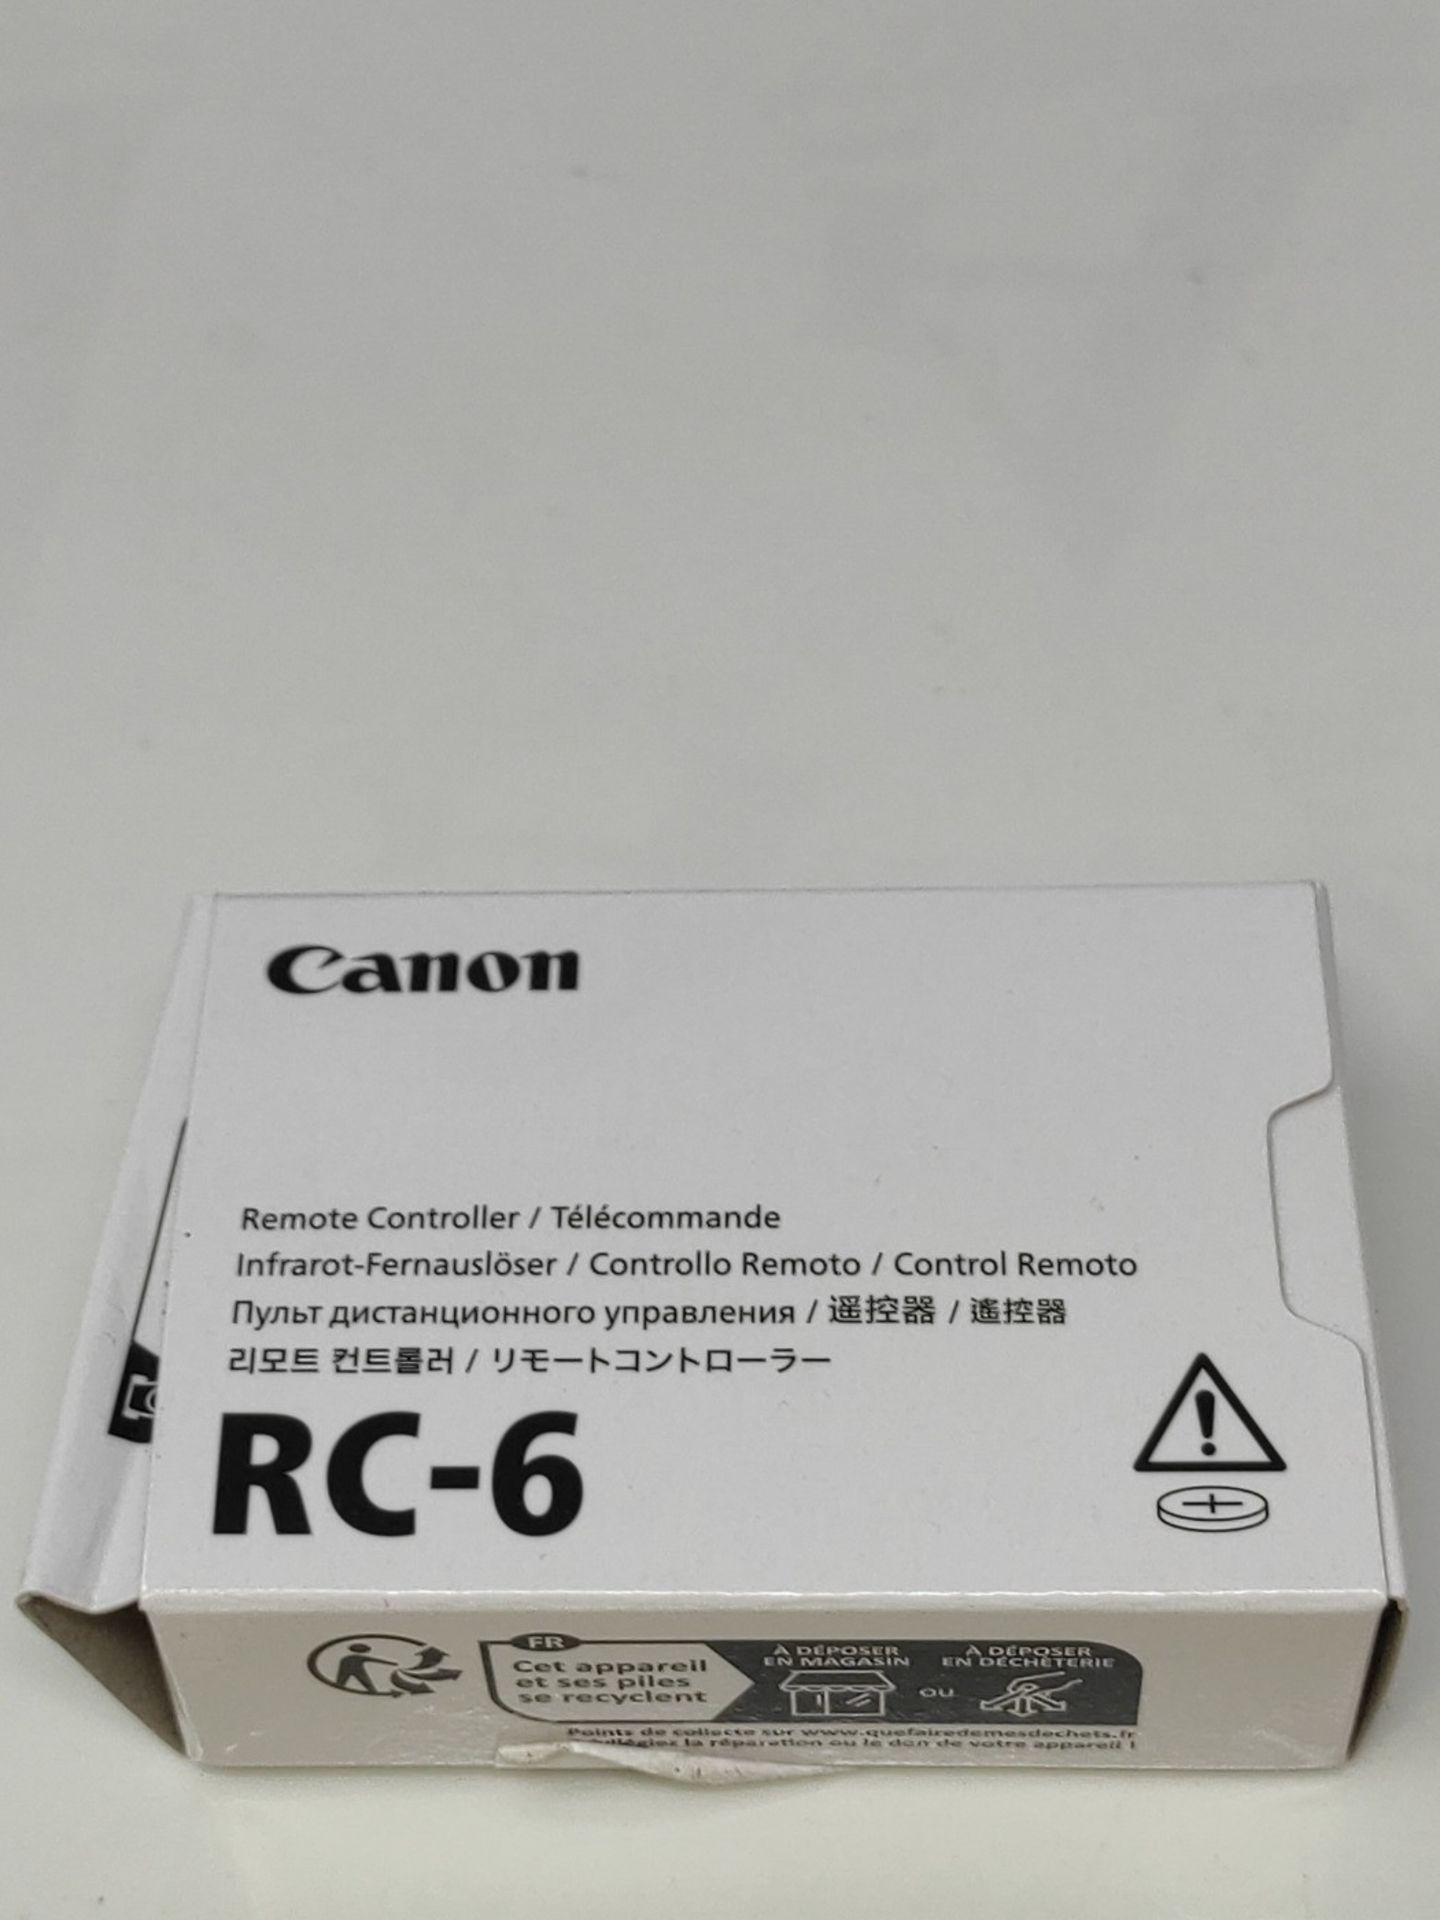 Canon RC-6 Infrared Remote Control - Image 2 of 3